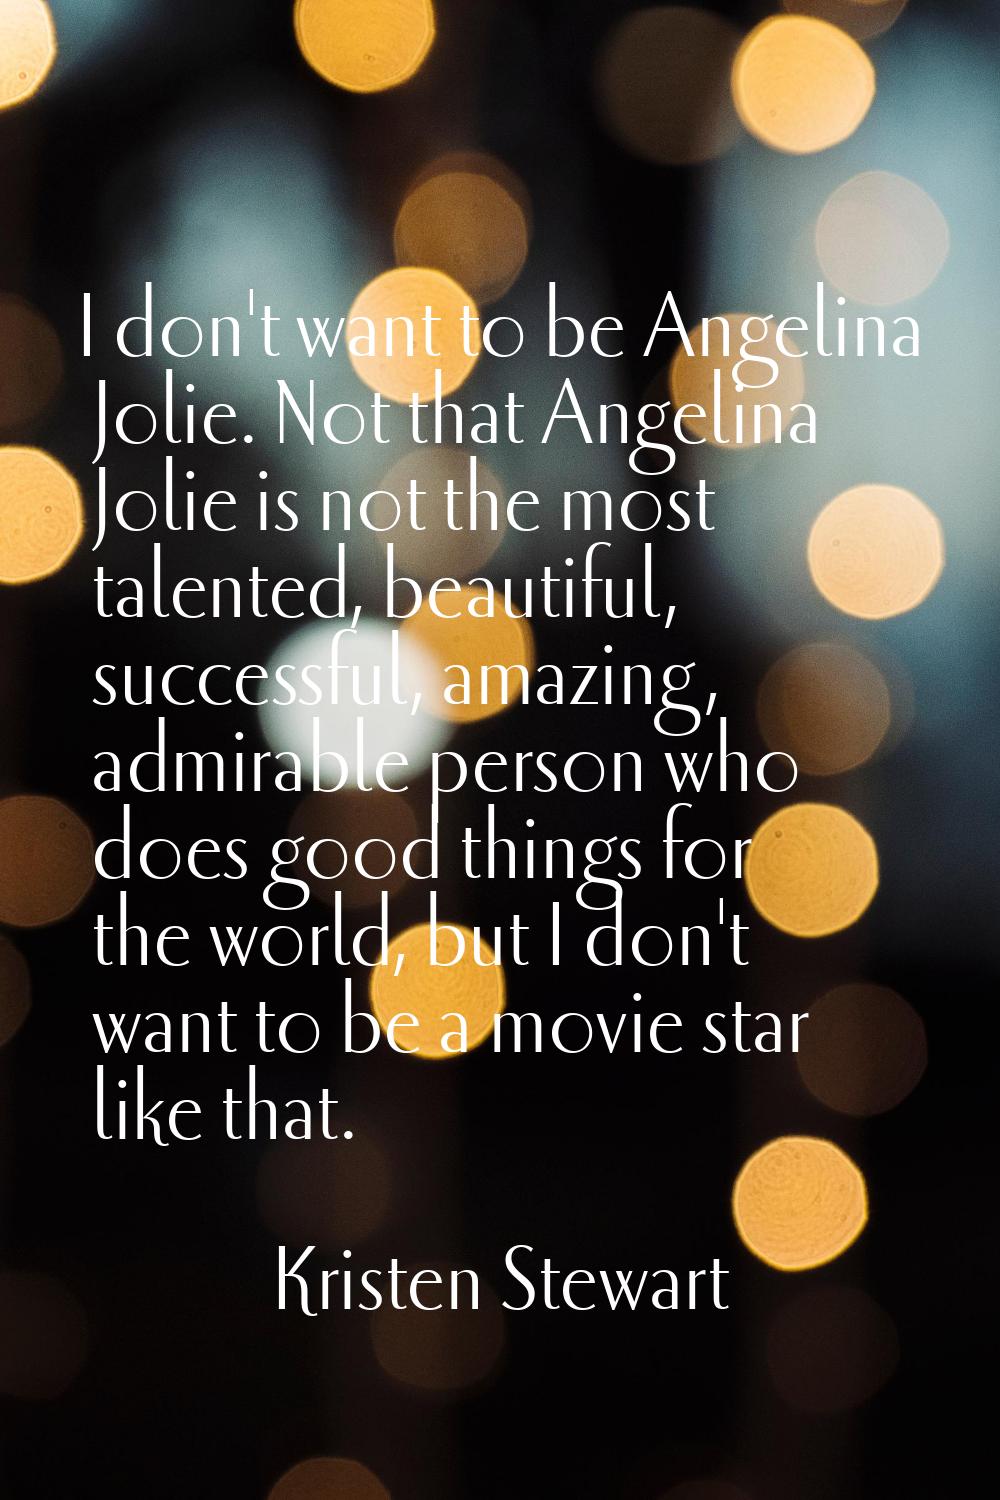 I don't want to be Angelina Jolie. Not that Angelina Jolie is not the most talented, beautiful, suc